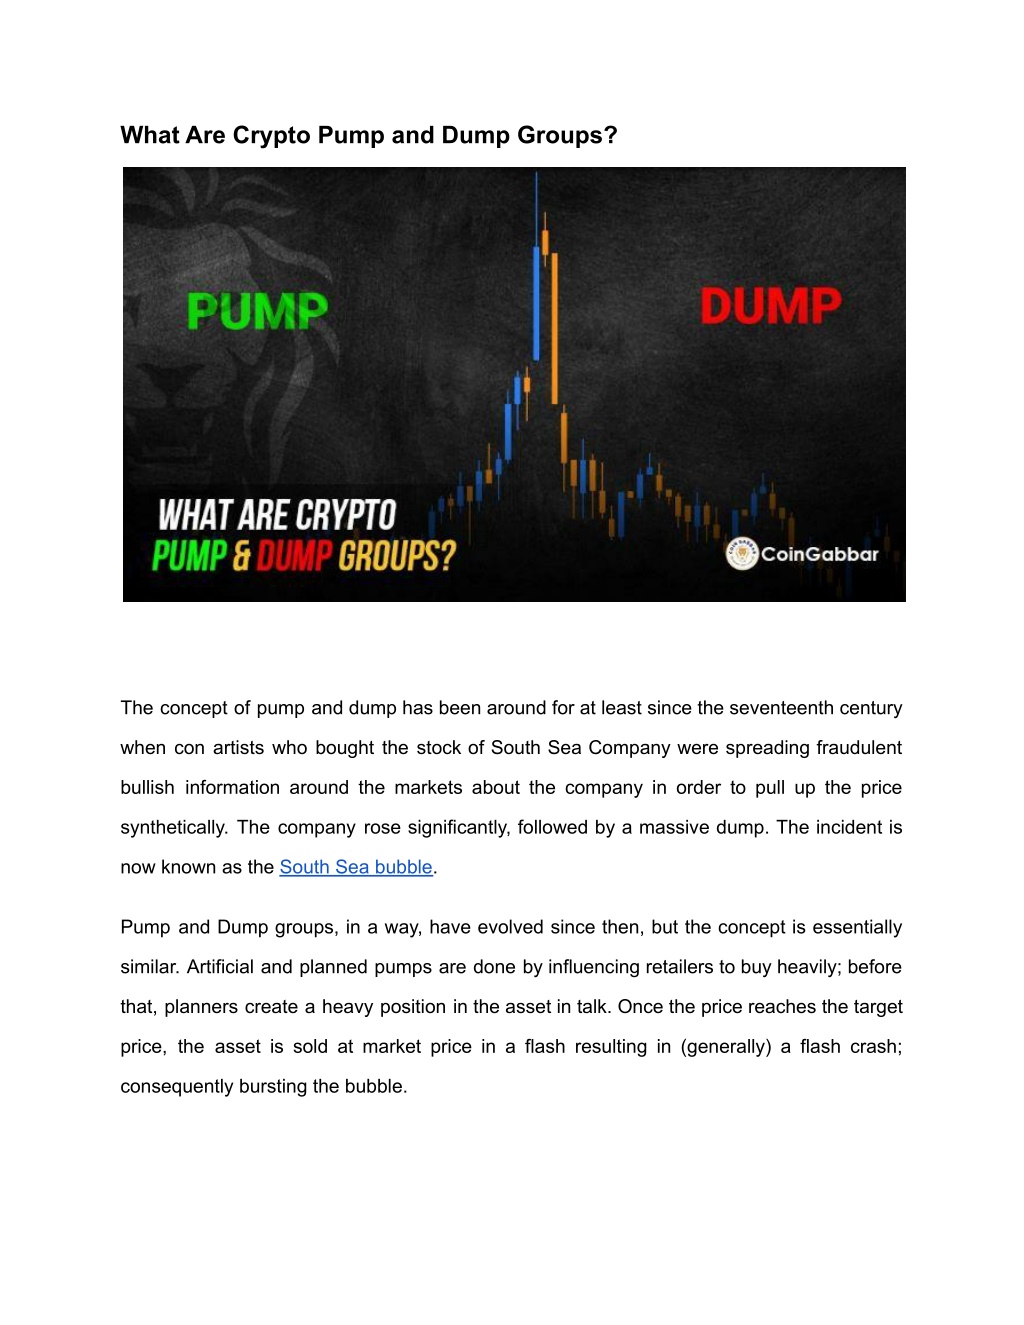 pump and dump crypto groups